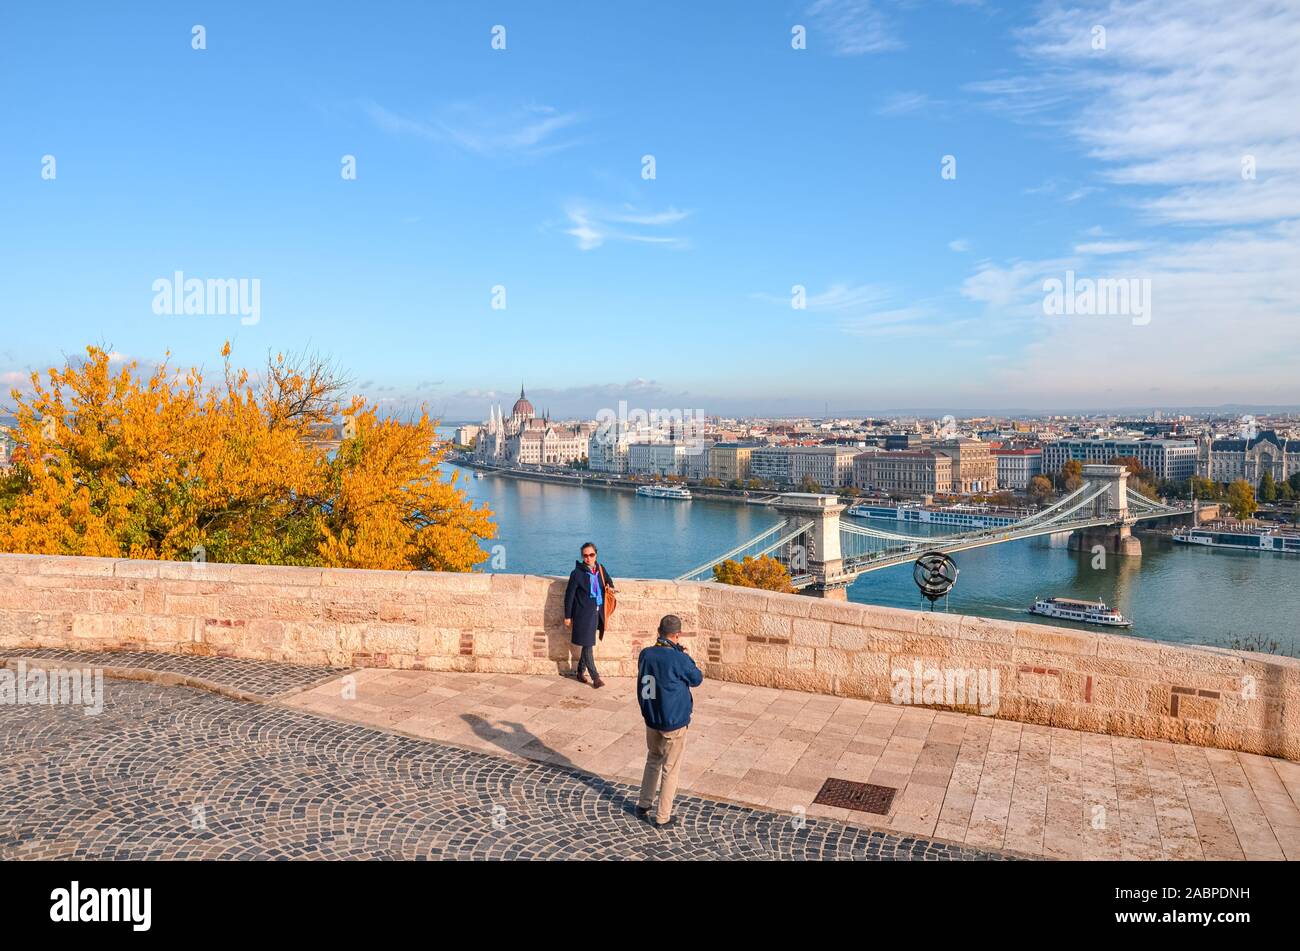 Budapest, Hungary - Nov 6, 2019: Older Asian couple taking travel pictures on the viewpoint above the Hungarian city. Danube river, Hungarian parliament building and Szechenyi Bridge in background. Stock Photo